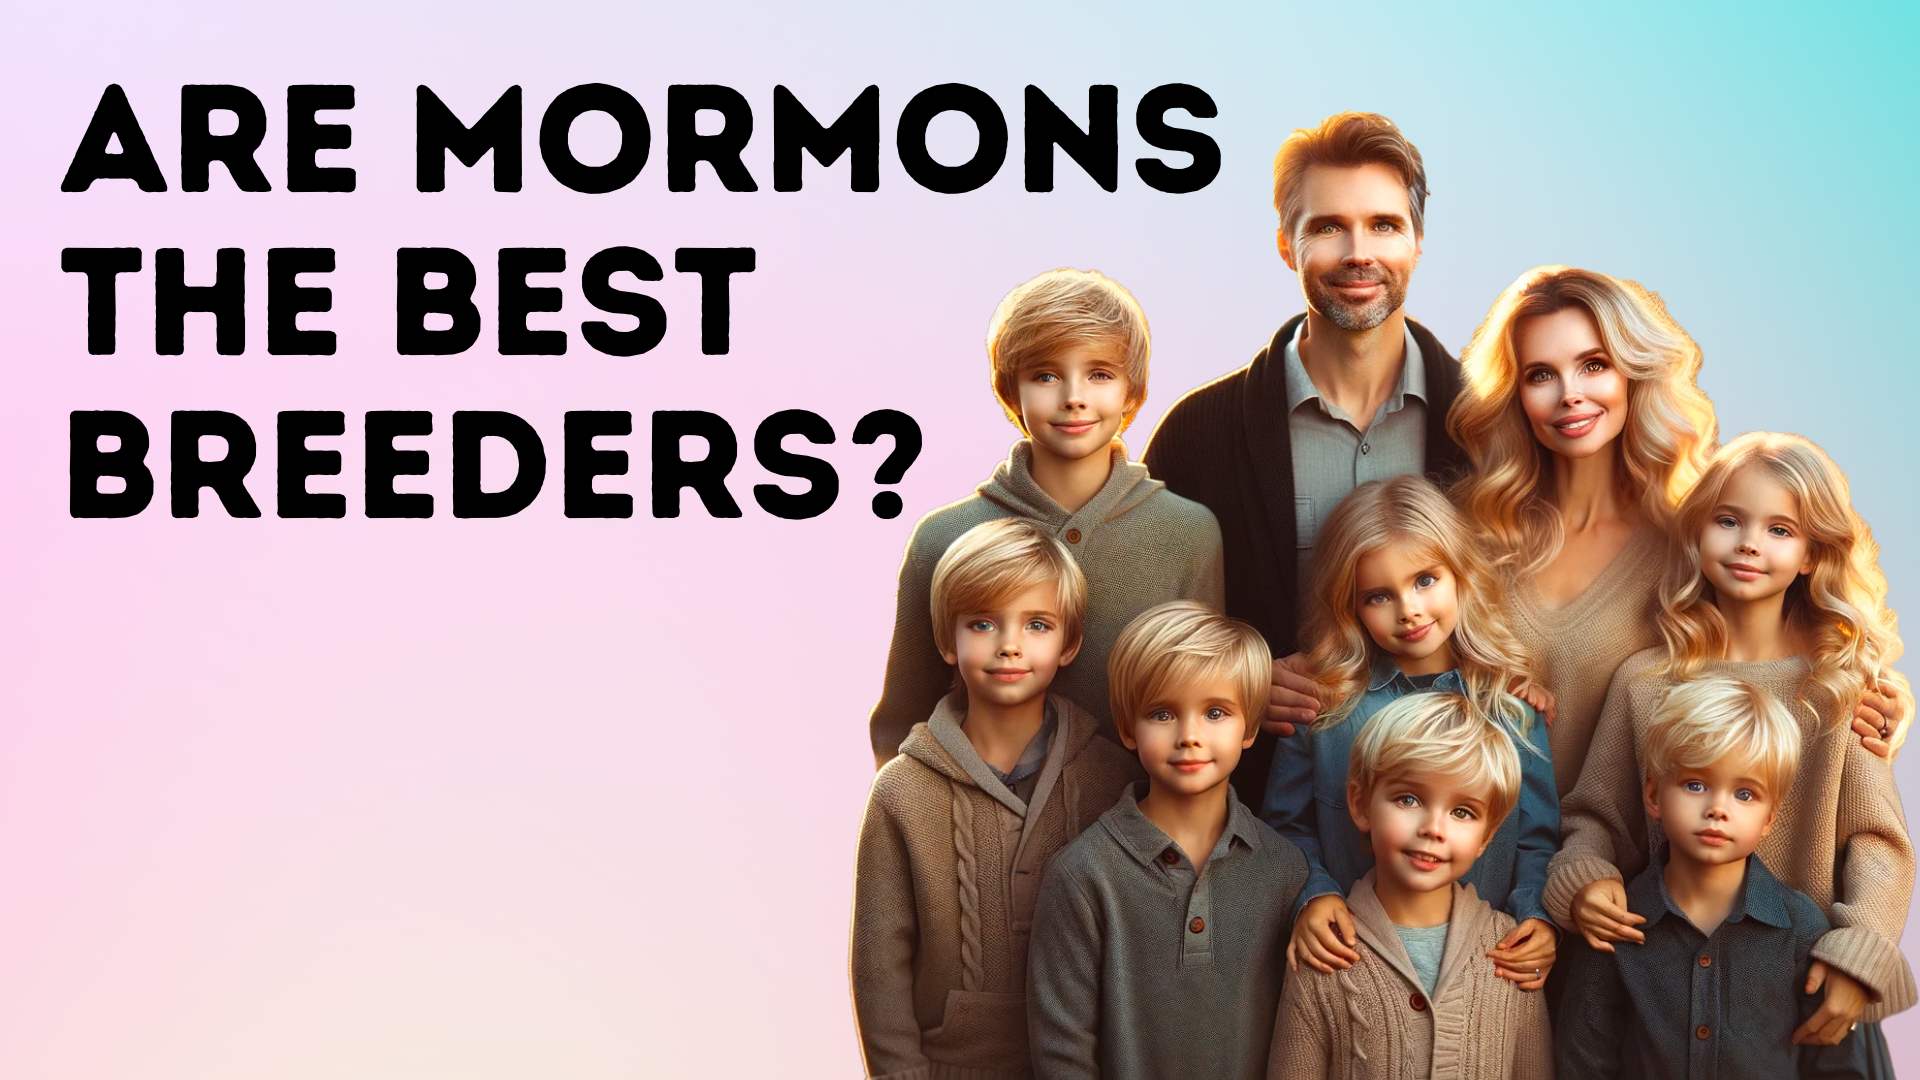 Are Mormons the Best Breeders?